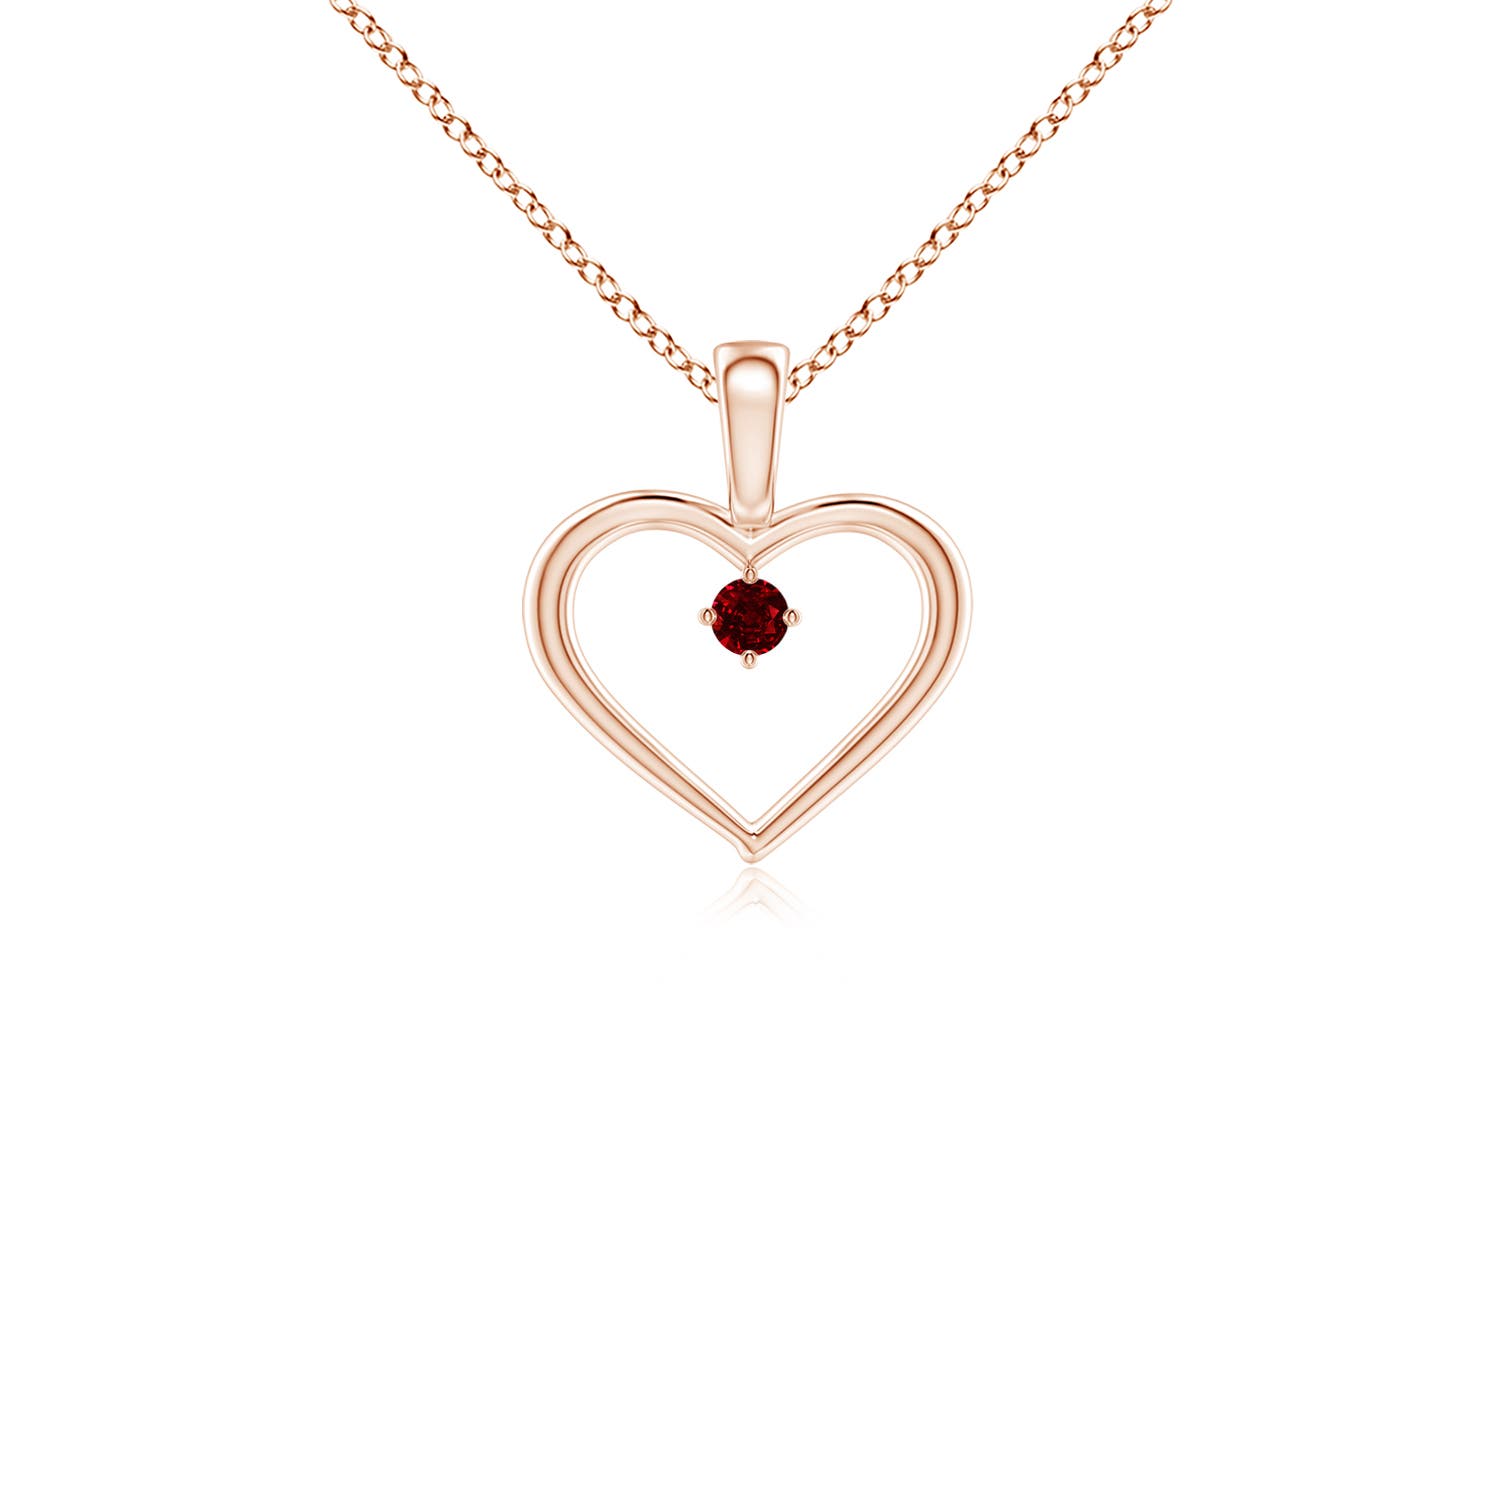 AAAA - Ruby / 0.09 CT / 14 KT Rose Gold